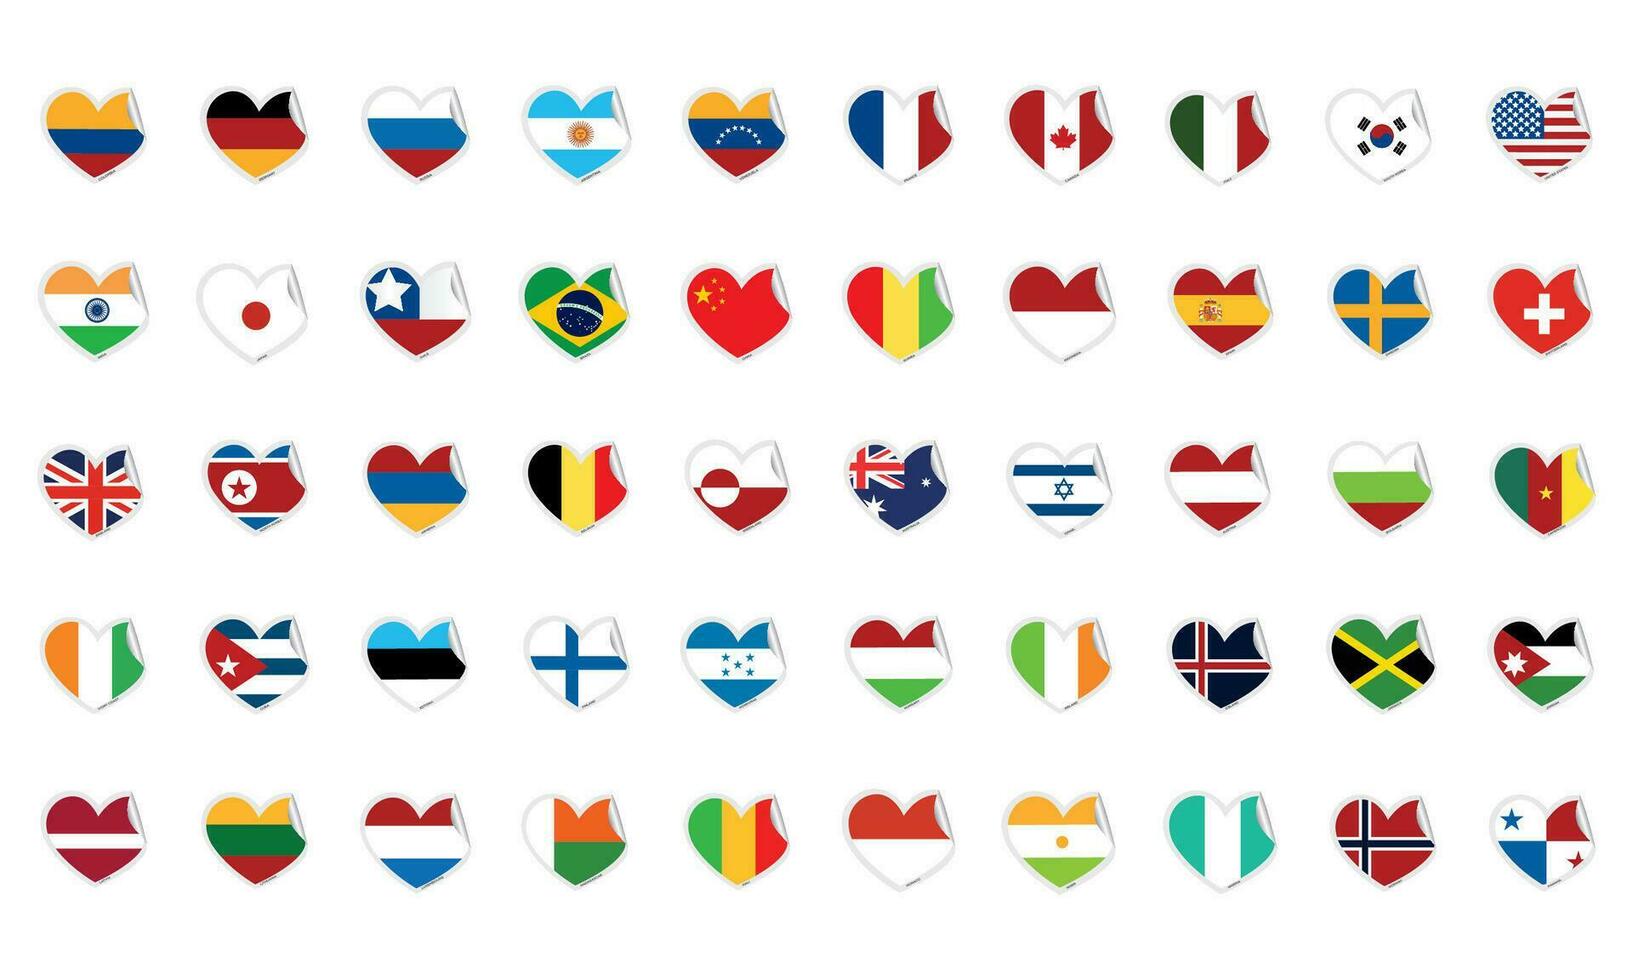 Set of heart shapes with different flags Vector